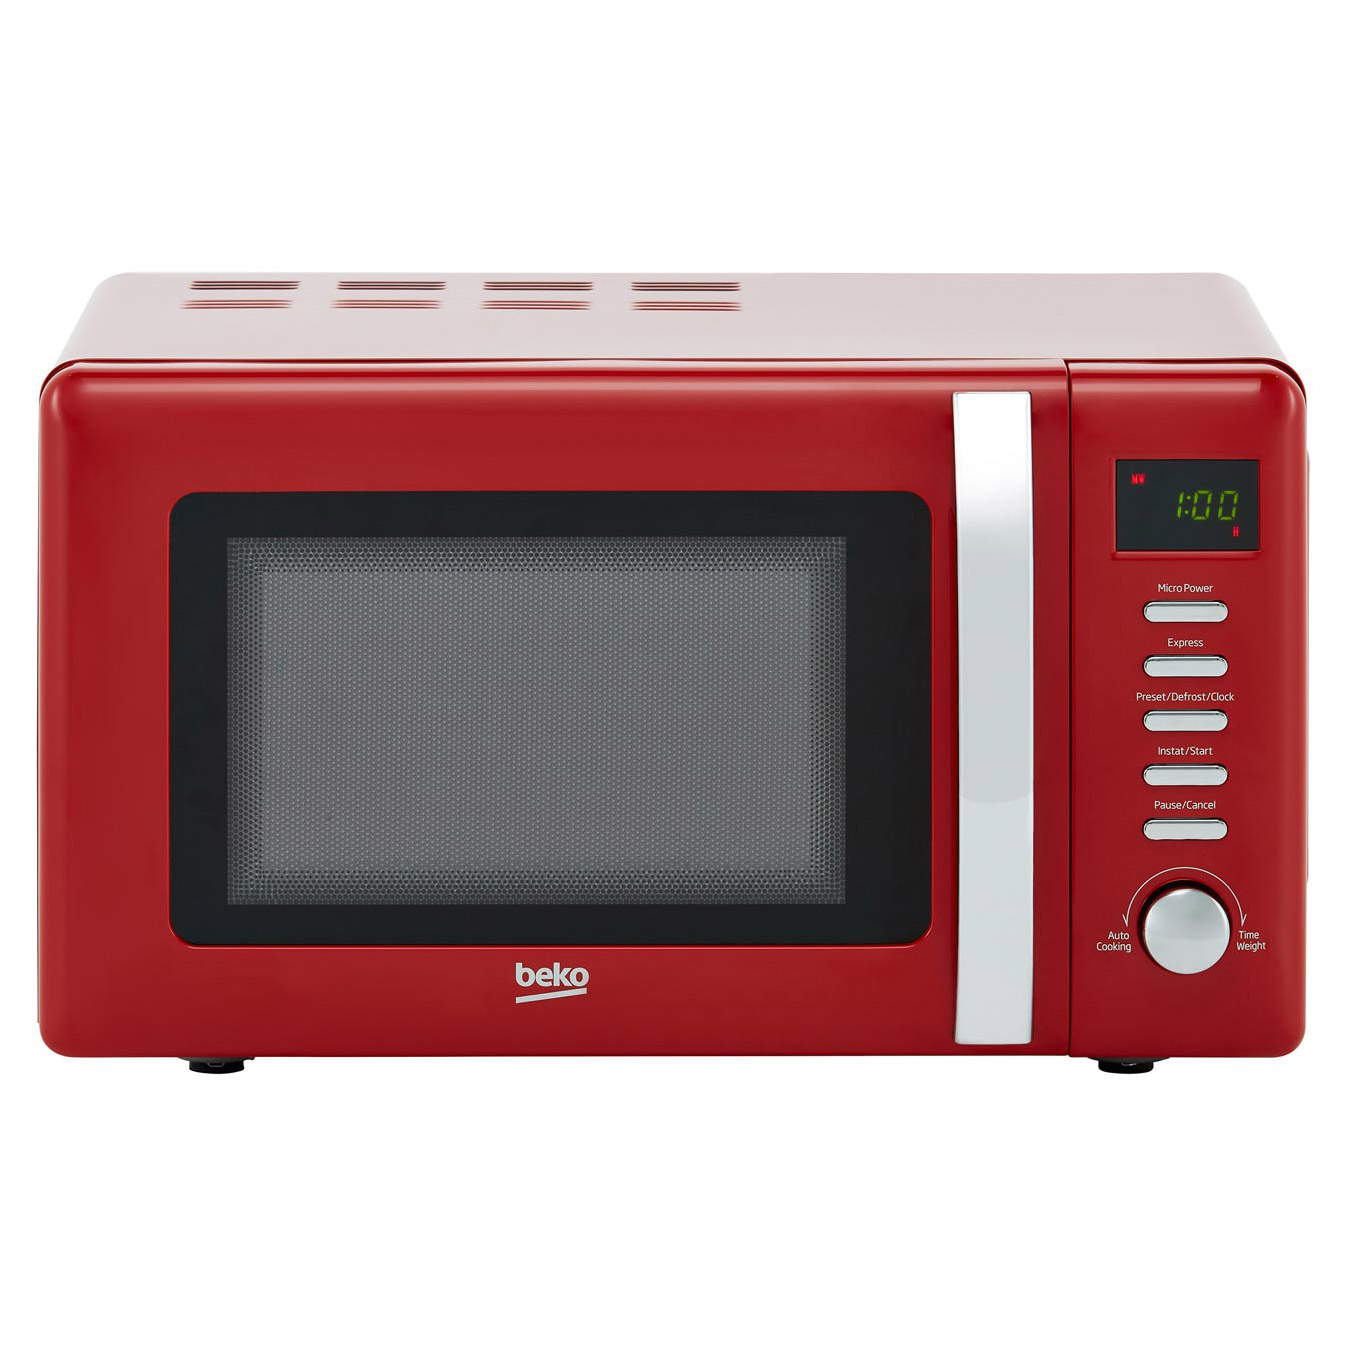 Beko MOC20200R Retro Style Microwave Oven in Red, 20 Litre 800W